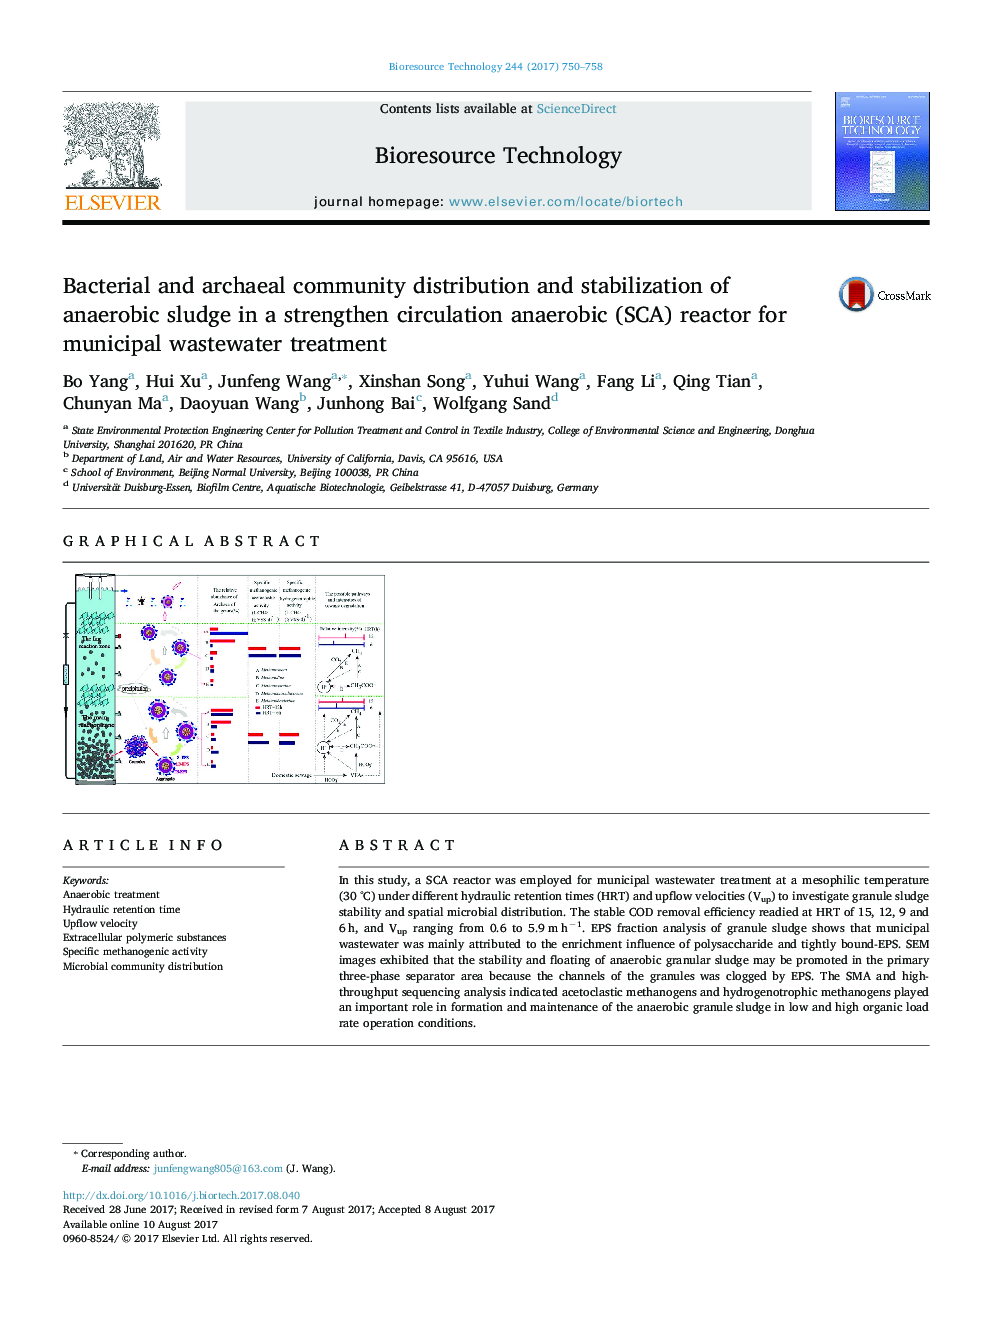 Bacterial and archaeal community distribution and stabilization of anaerobic sludge in a strengthen circulation anaerobic (SCA) reactor for municipal wastewater treatment